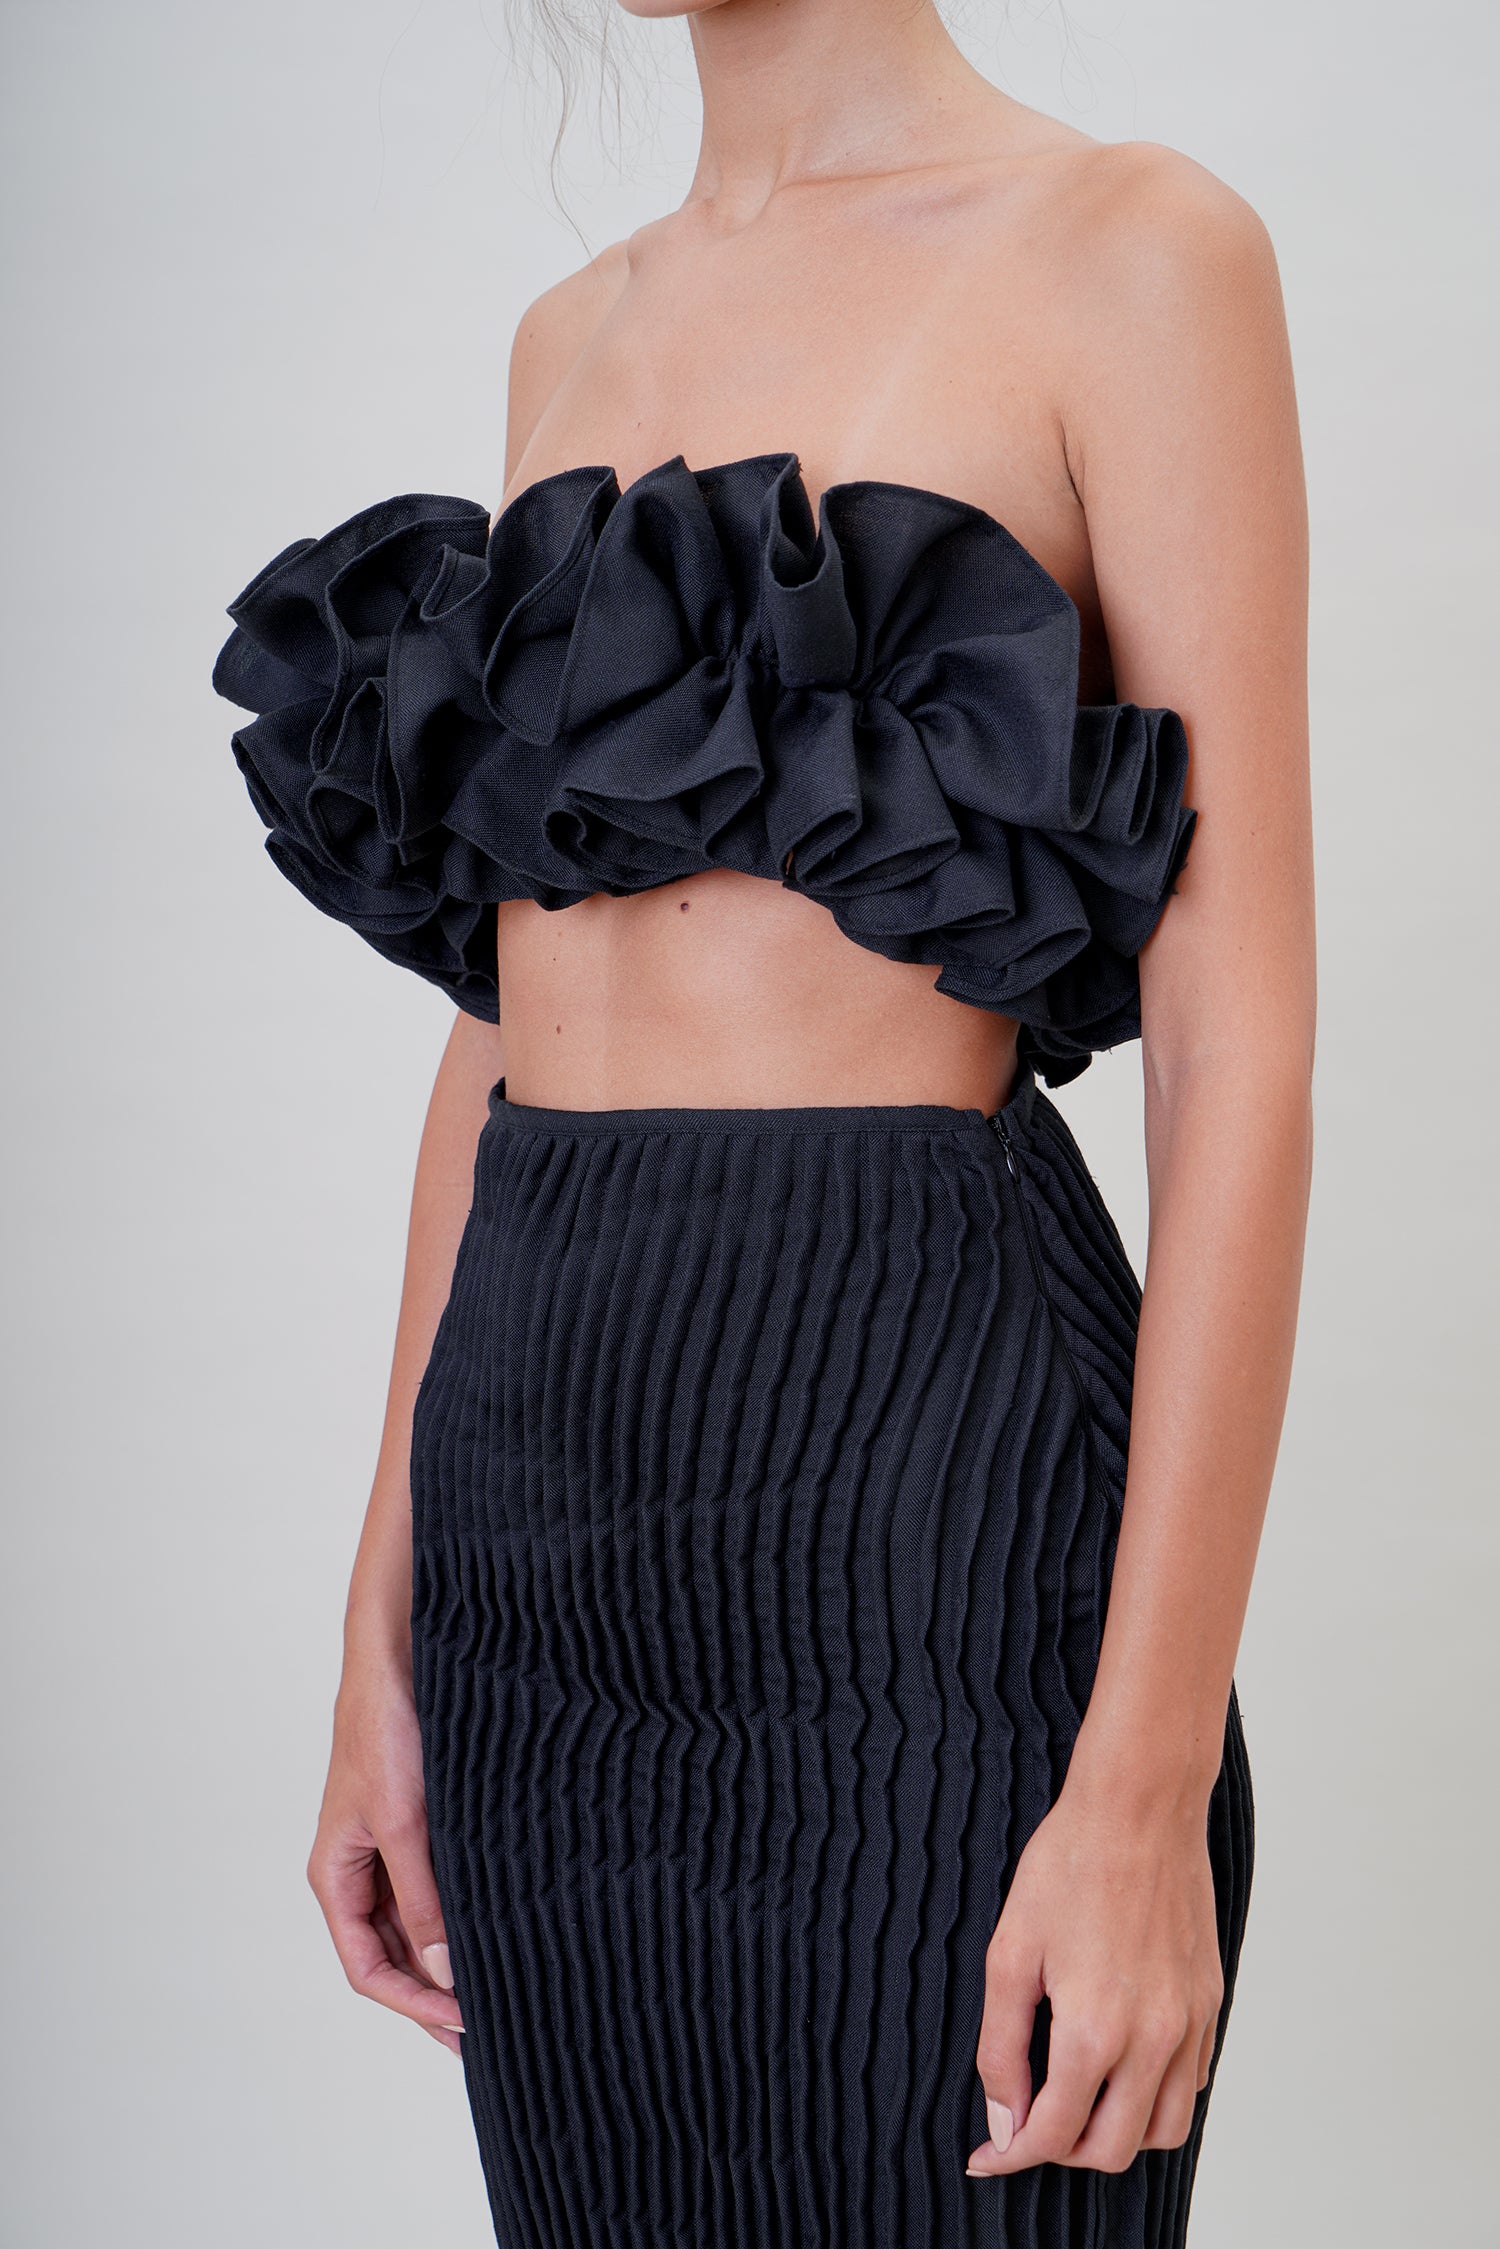 SABLE CHAUD BUSTIER